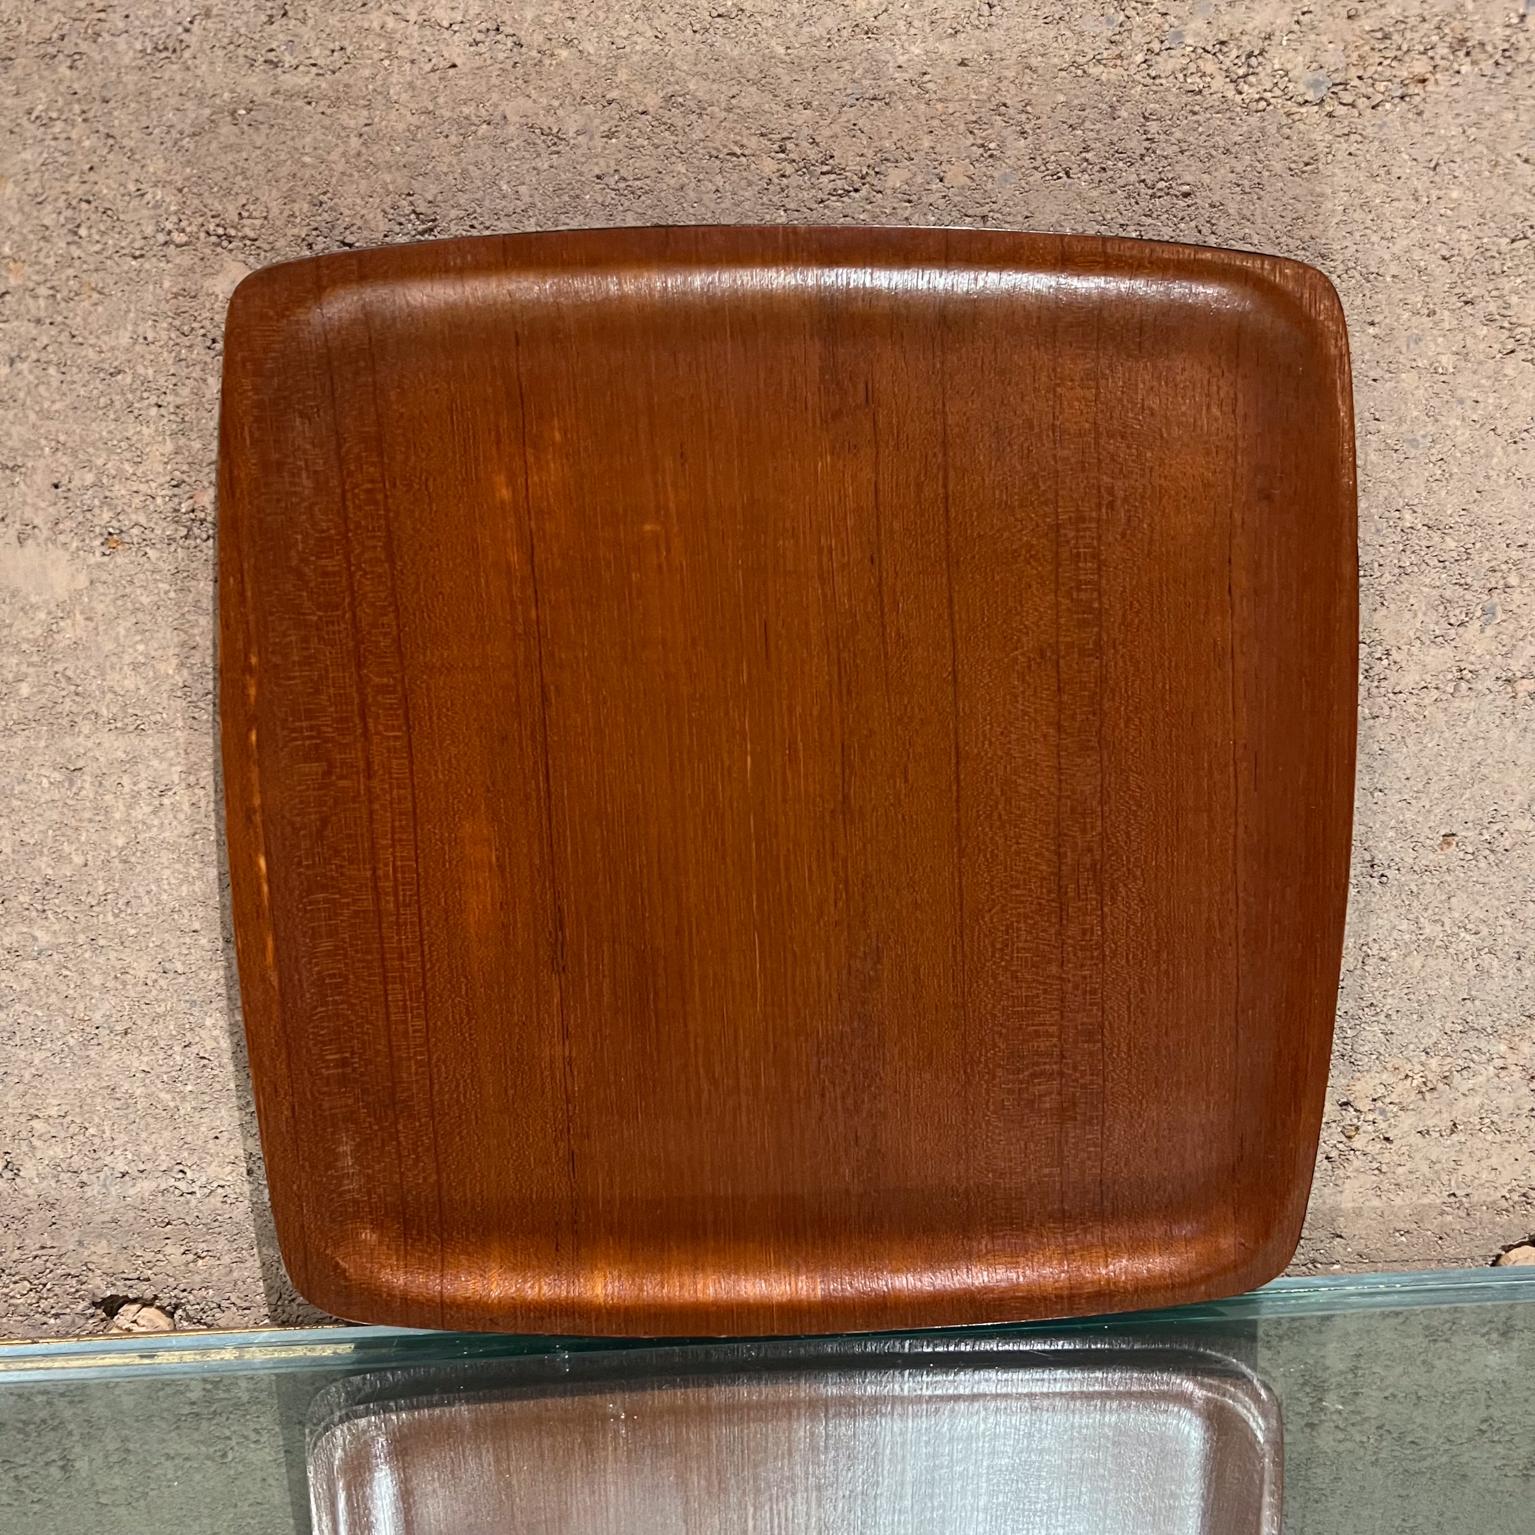 
1970s Vintage Square Teak Bent Plywood Serving Barware Tray
13.88 x 13.88 x .5 d
Preowned original vintage condition, refer to listed images.